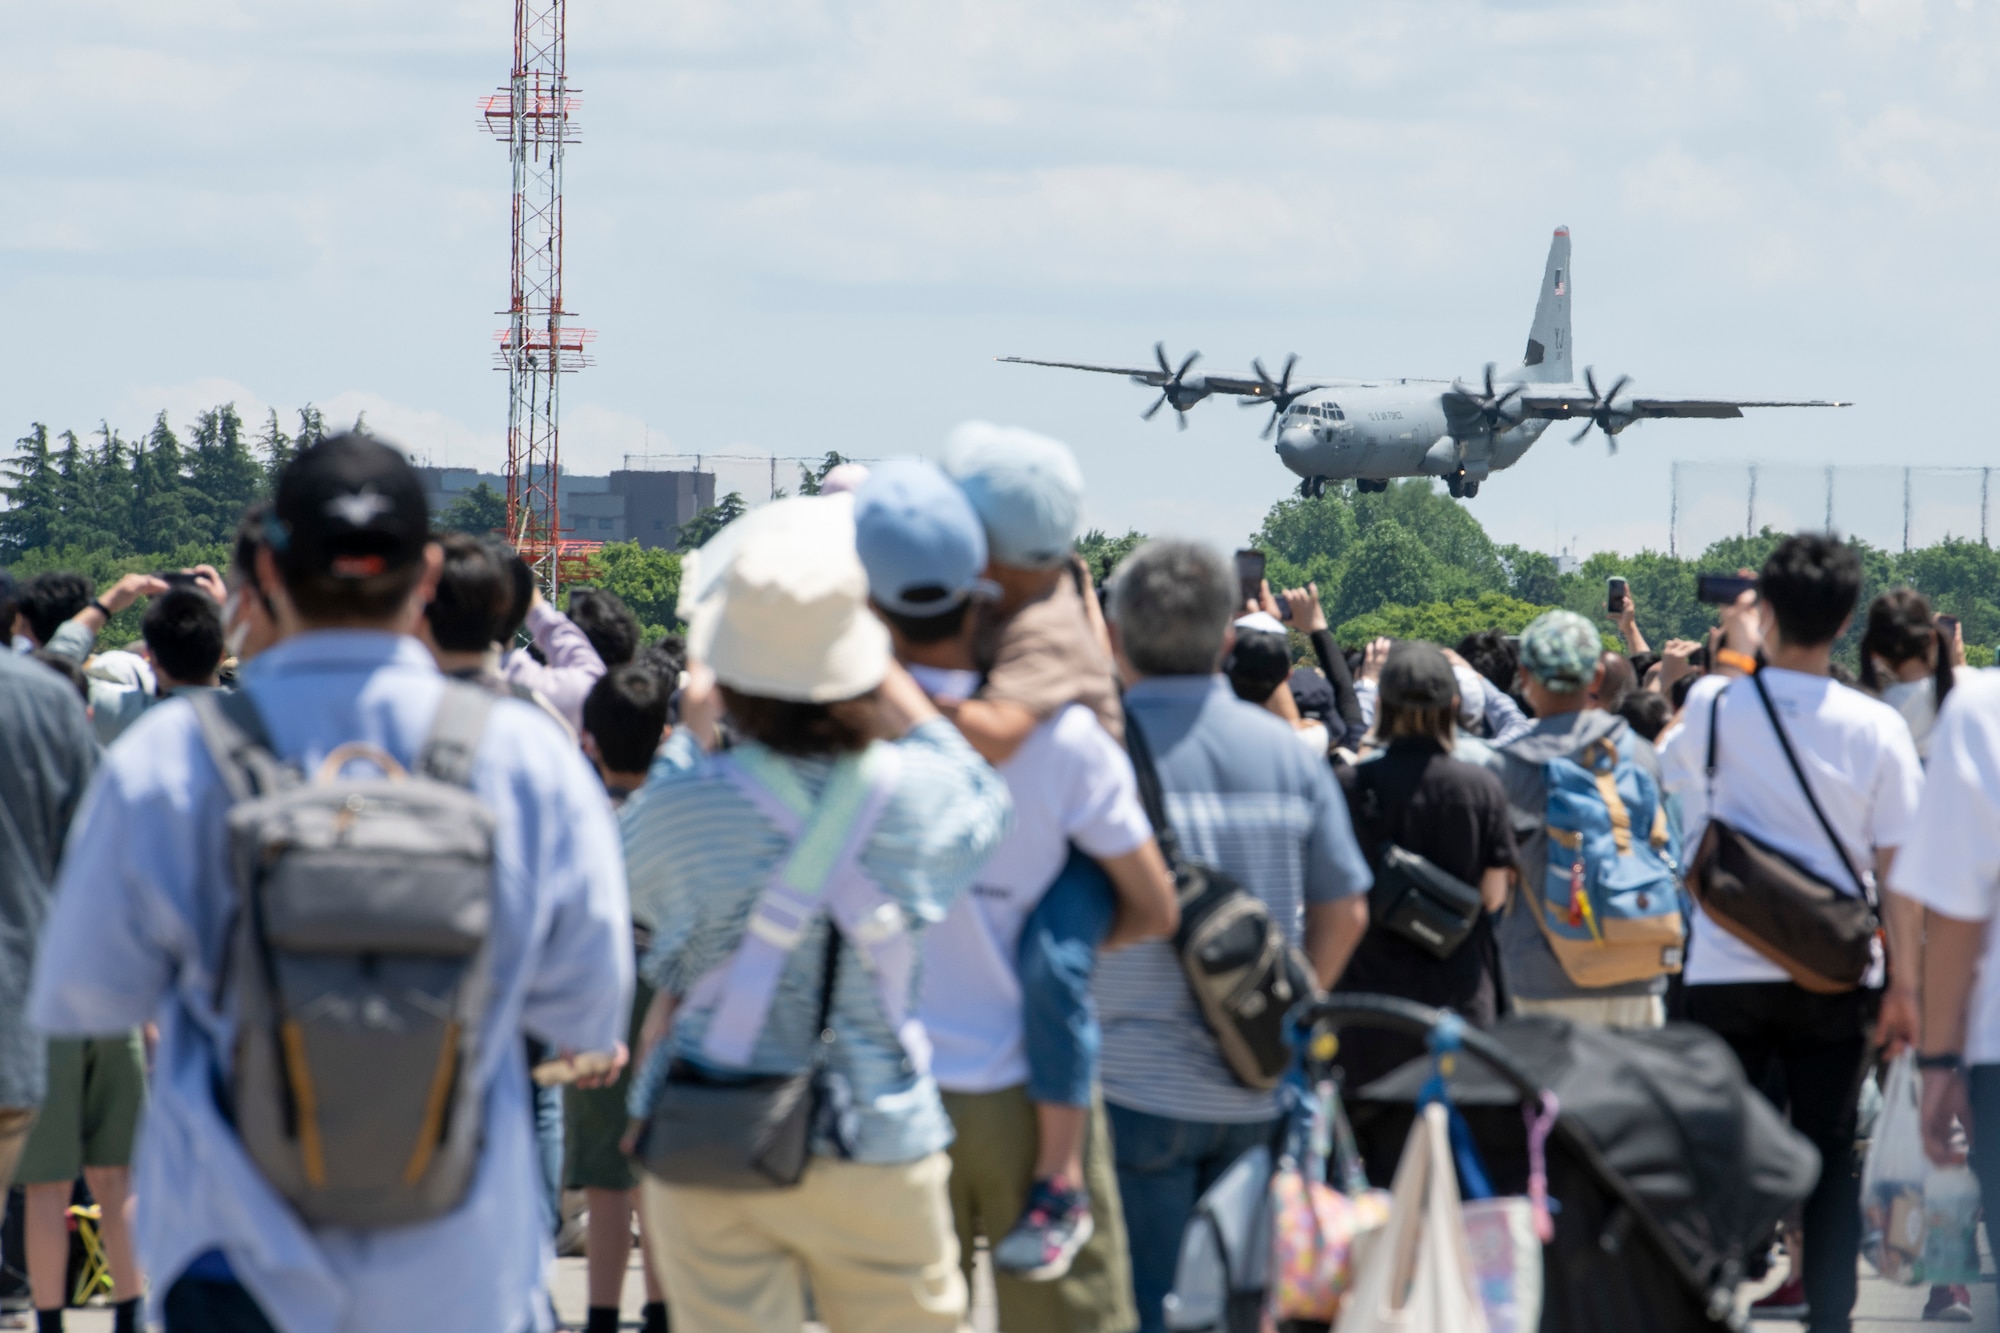 Attendee look on as a C-130J Super Hercules lands during Friendship Festival 2022, at Yokota Air Base, Japan, May 22. The two-day festival was an opportunity for visitors to learn more about the U.S. and Japan bilateral partnership, while strengthening the bonds between Yokota and the local communities. Yokota was able to host the event with the support of Japan Self-Defense Force, sister services and the local community. (U.S. Air Force photo by Machiko Arita)